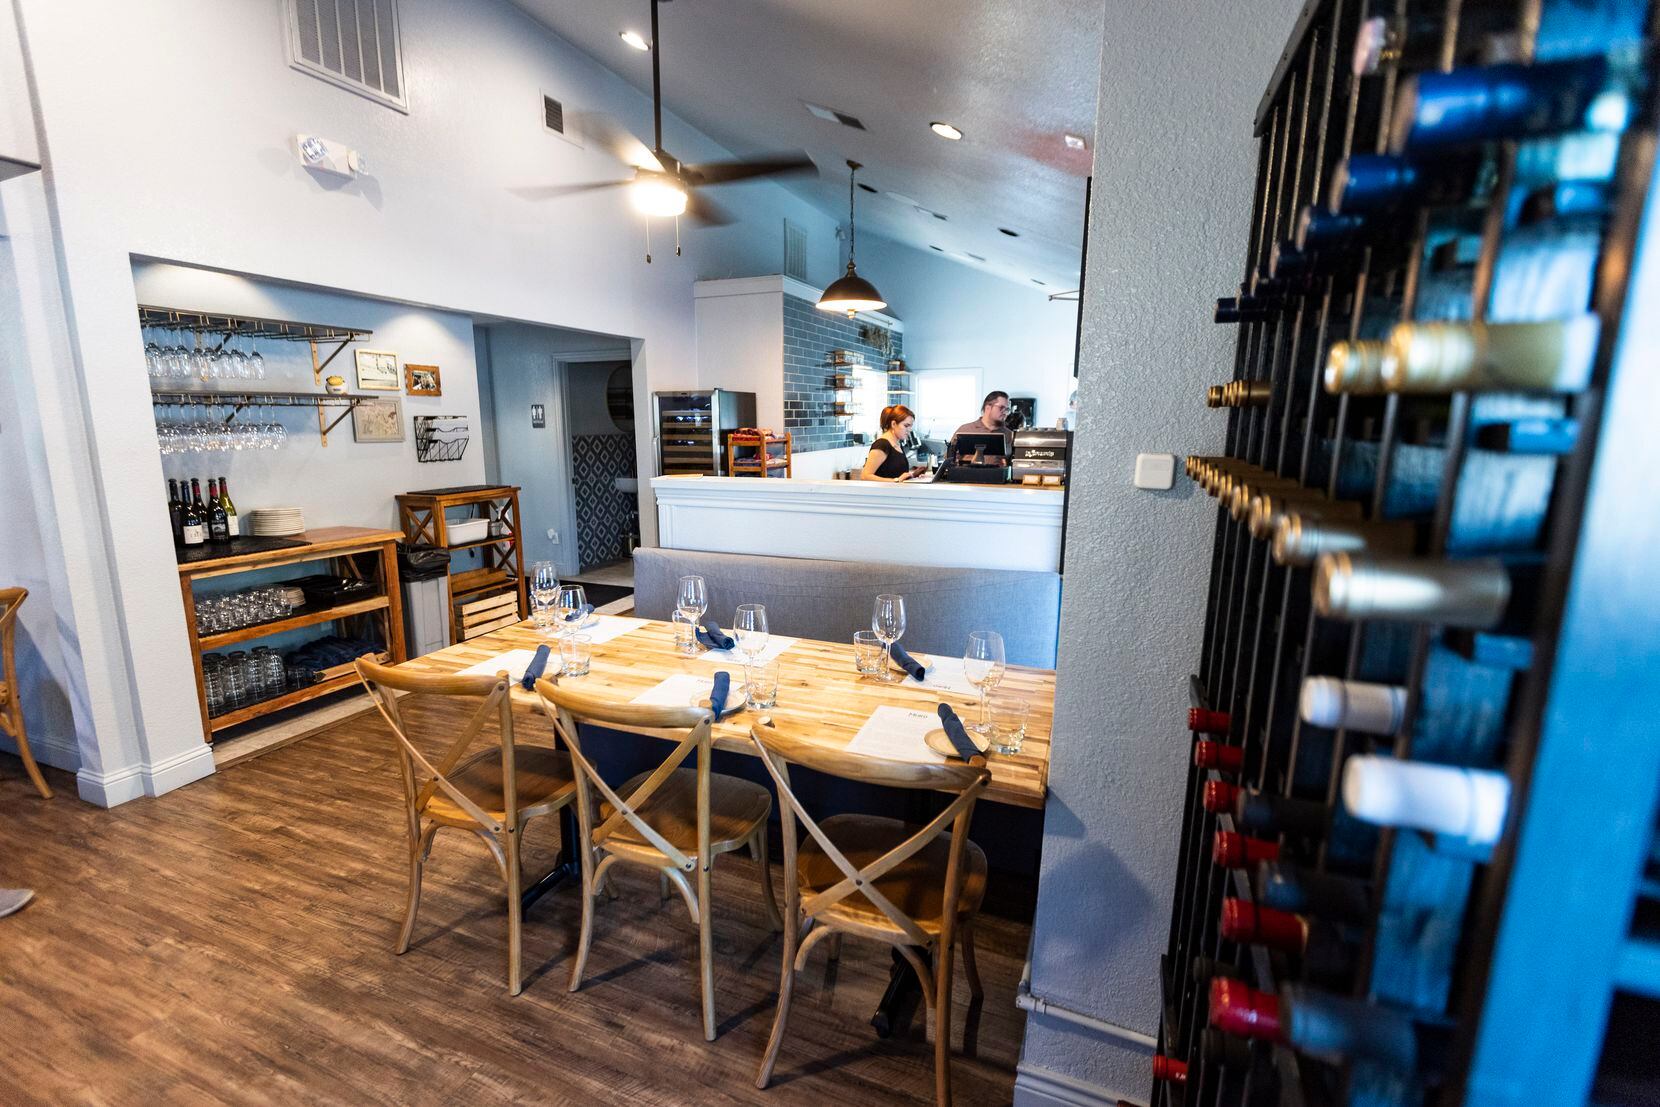 The dining room at Osteria il Muro in Denton is casual and cozy.